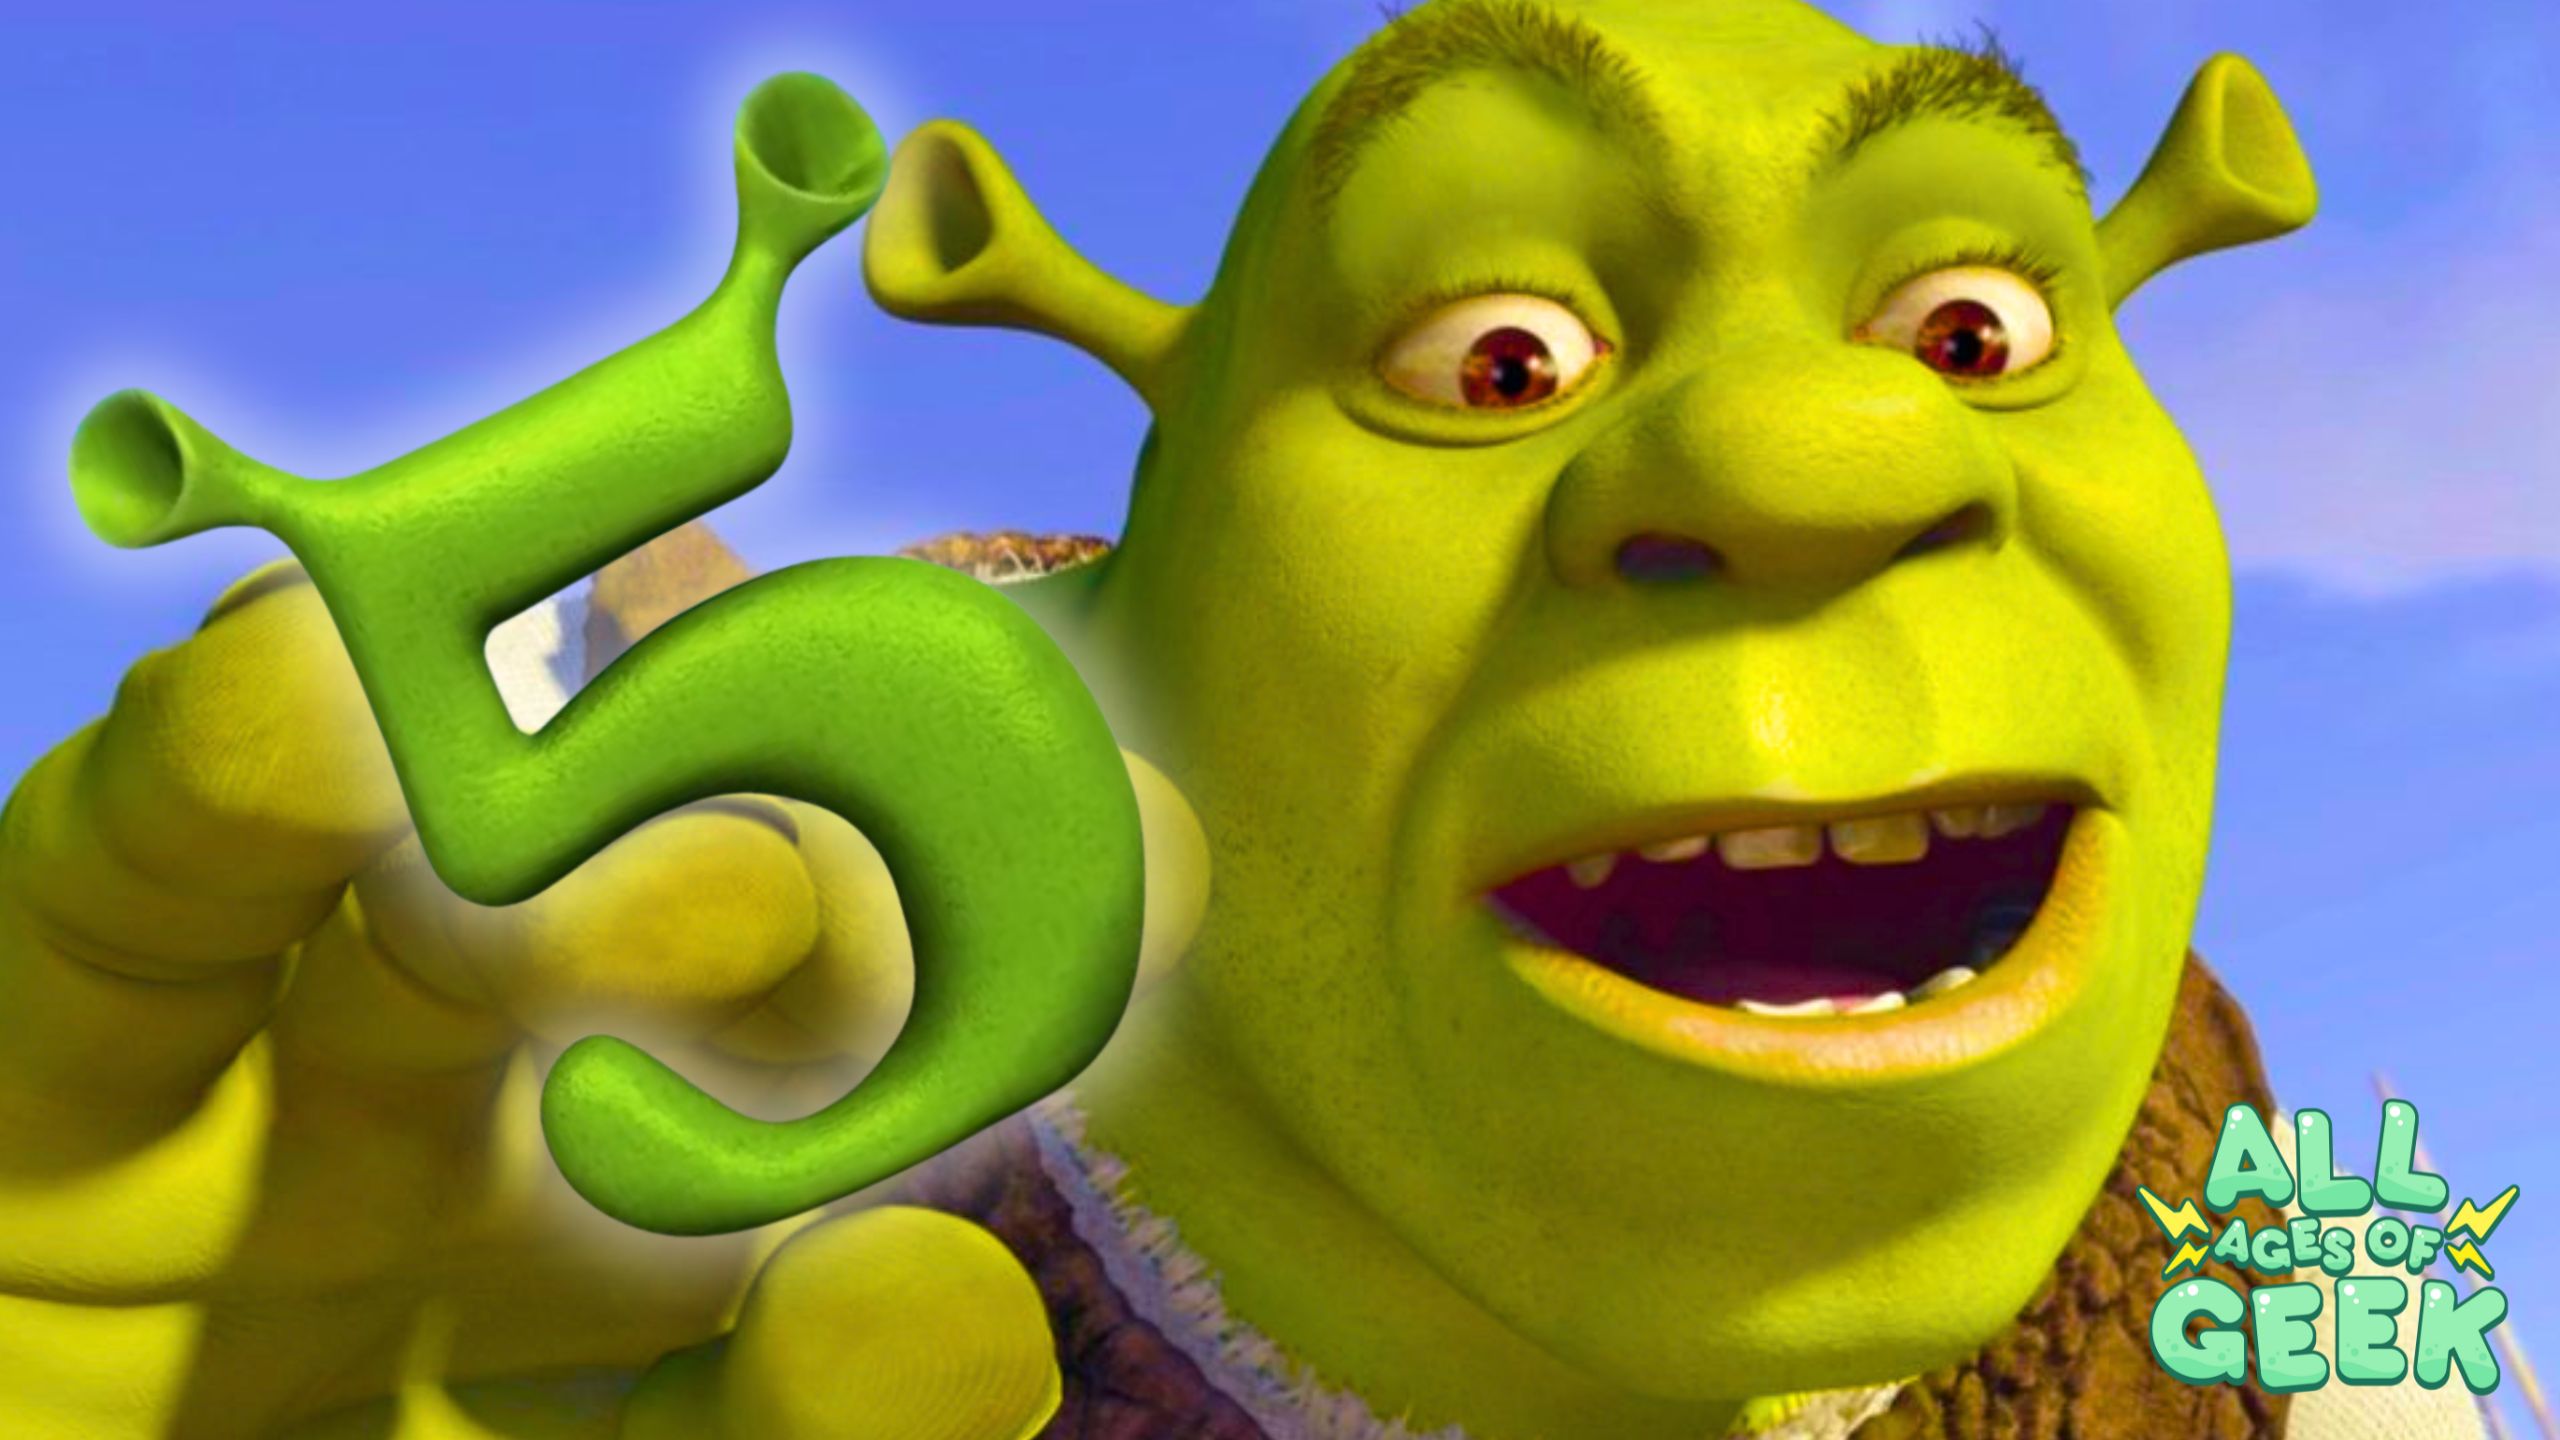 "Shrek holding a large green number 5 with a joyful expression on his face, set against a clear blue sky background. The 'All Ages of Geek' logo is visible in the bottom right corner